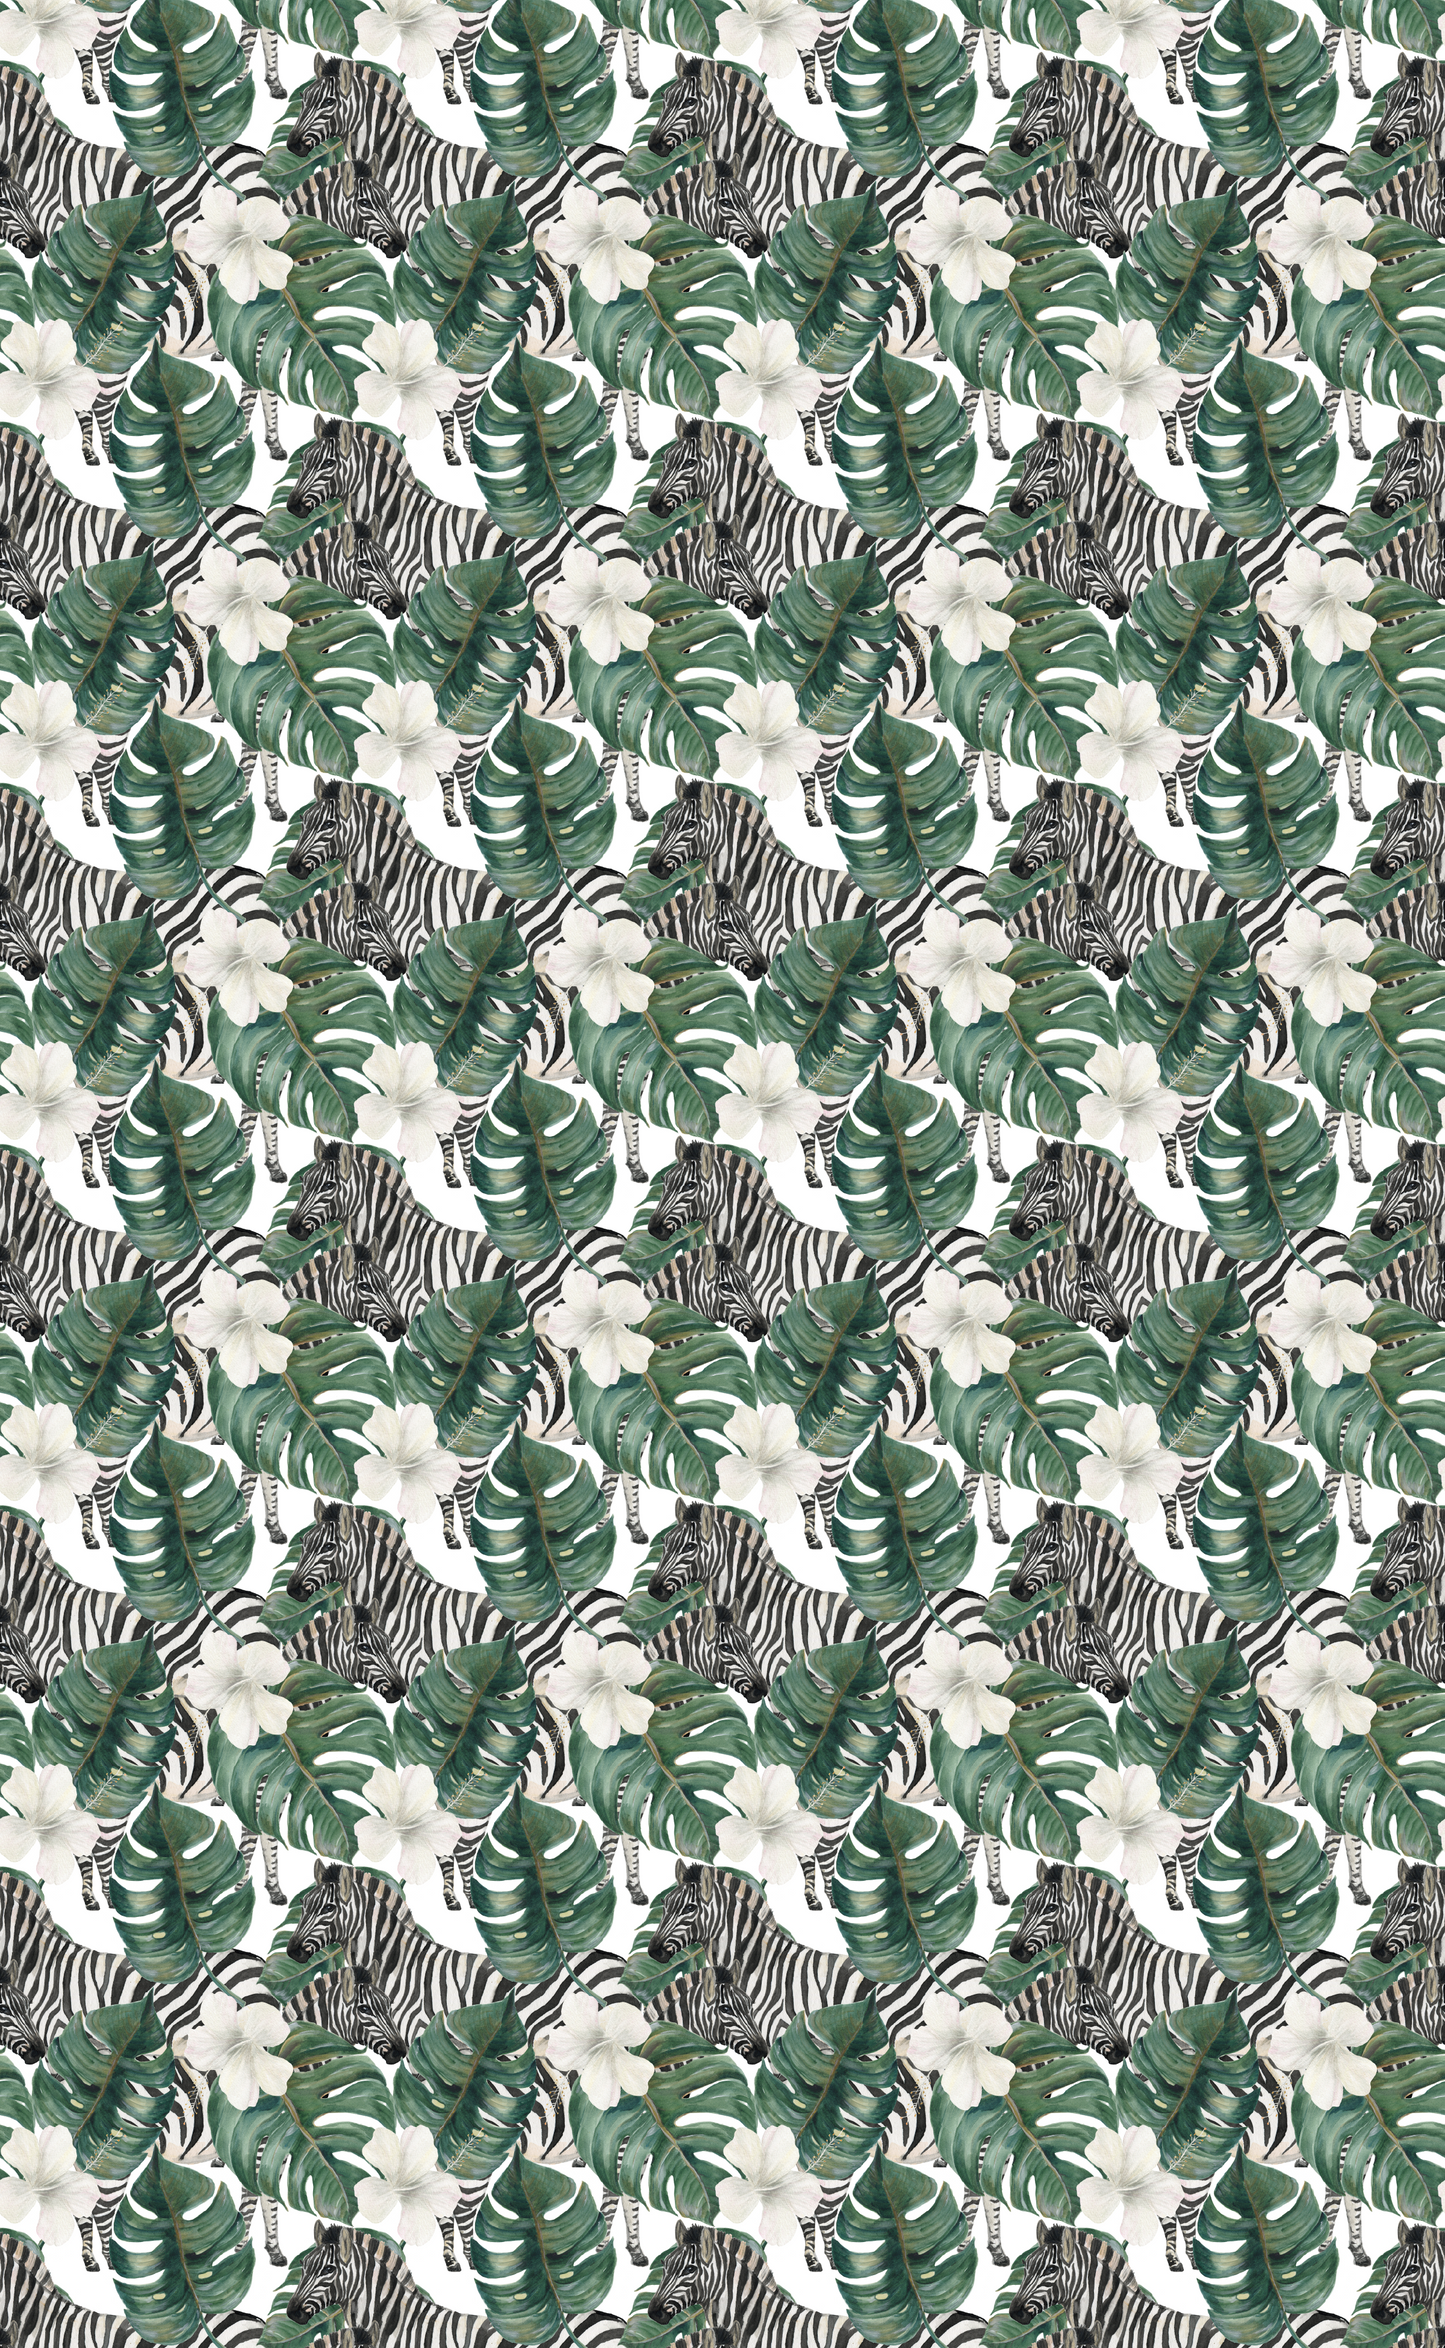 Zebras and Ferns  Faux Leather (8" x 13" Printed Sheet)